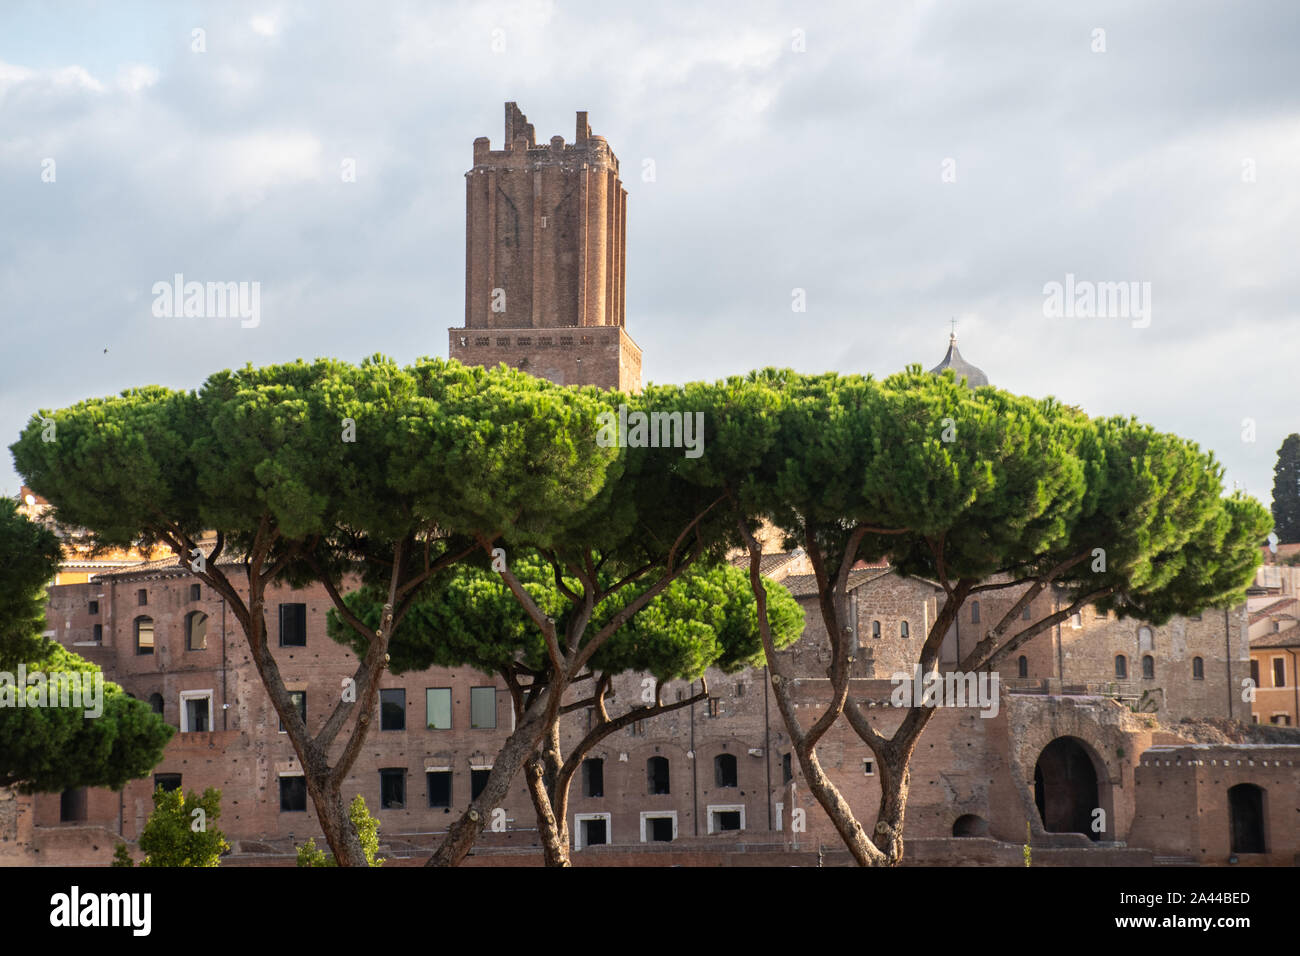 Palatine Hill Rome with Umbrella pine trees in foreground and tower behind Stock Photo